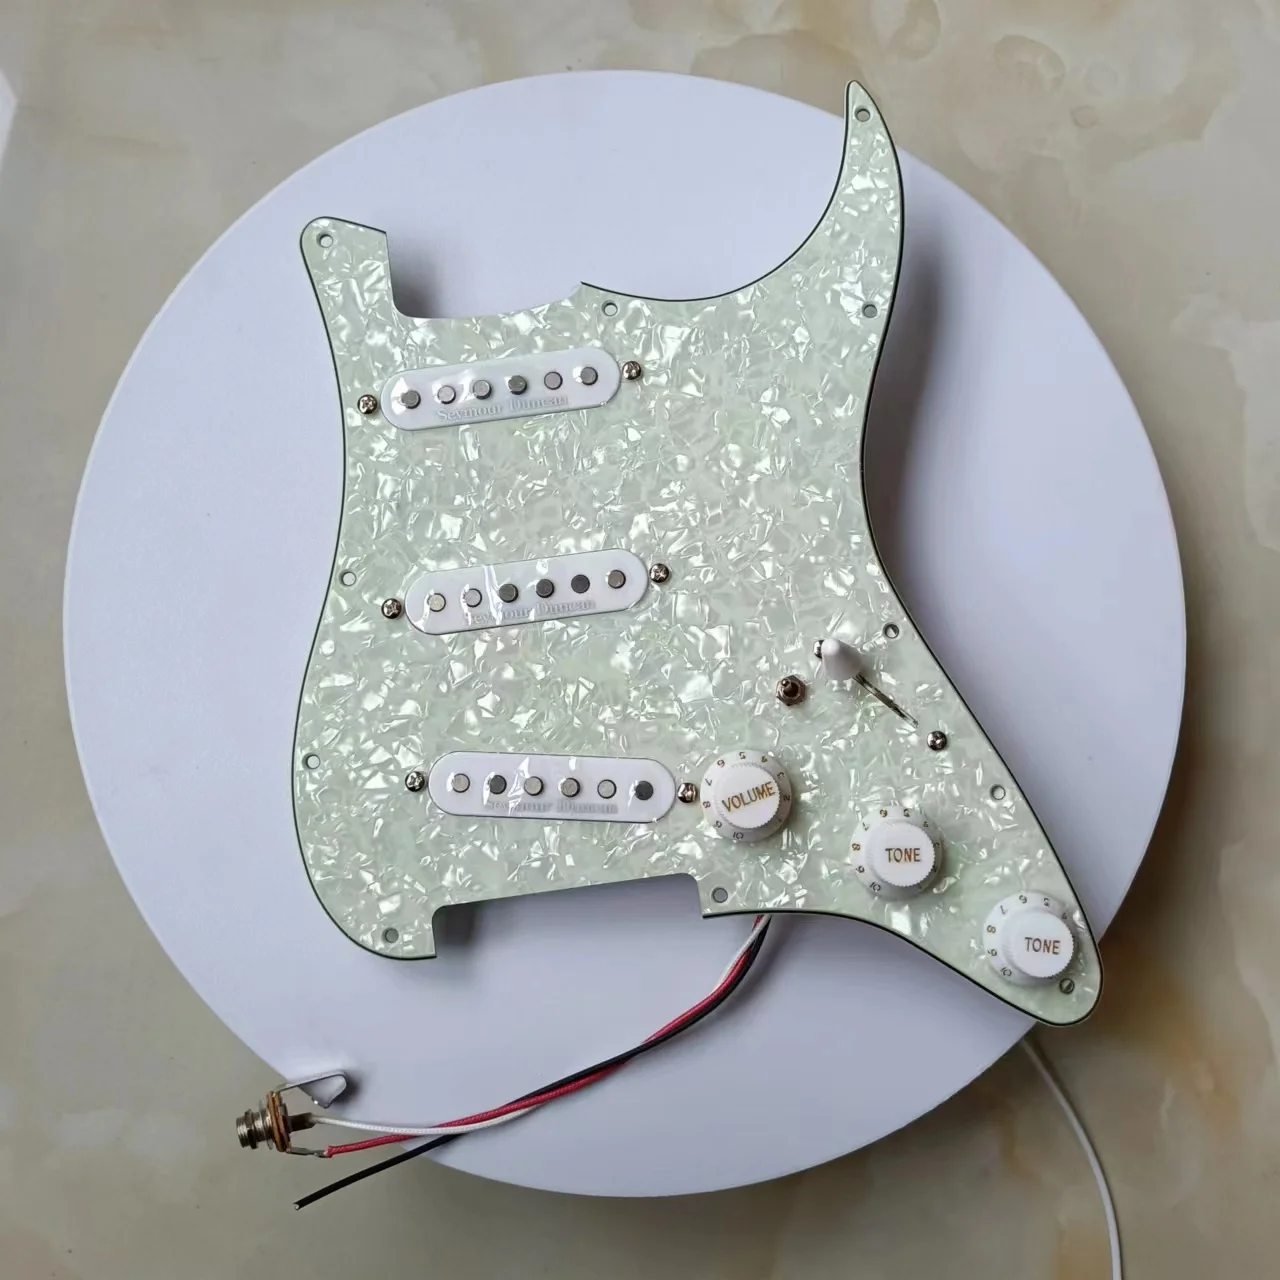 

Upgrade Prewired SSS Guitar Pickguard Set Multifunction Switch White SD Alnico Pickups Wiring Harness for Guitar